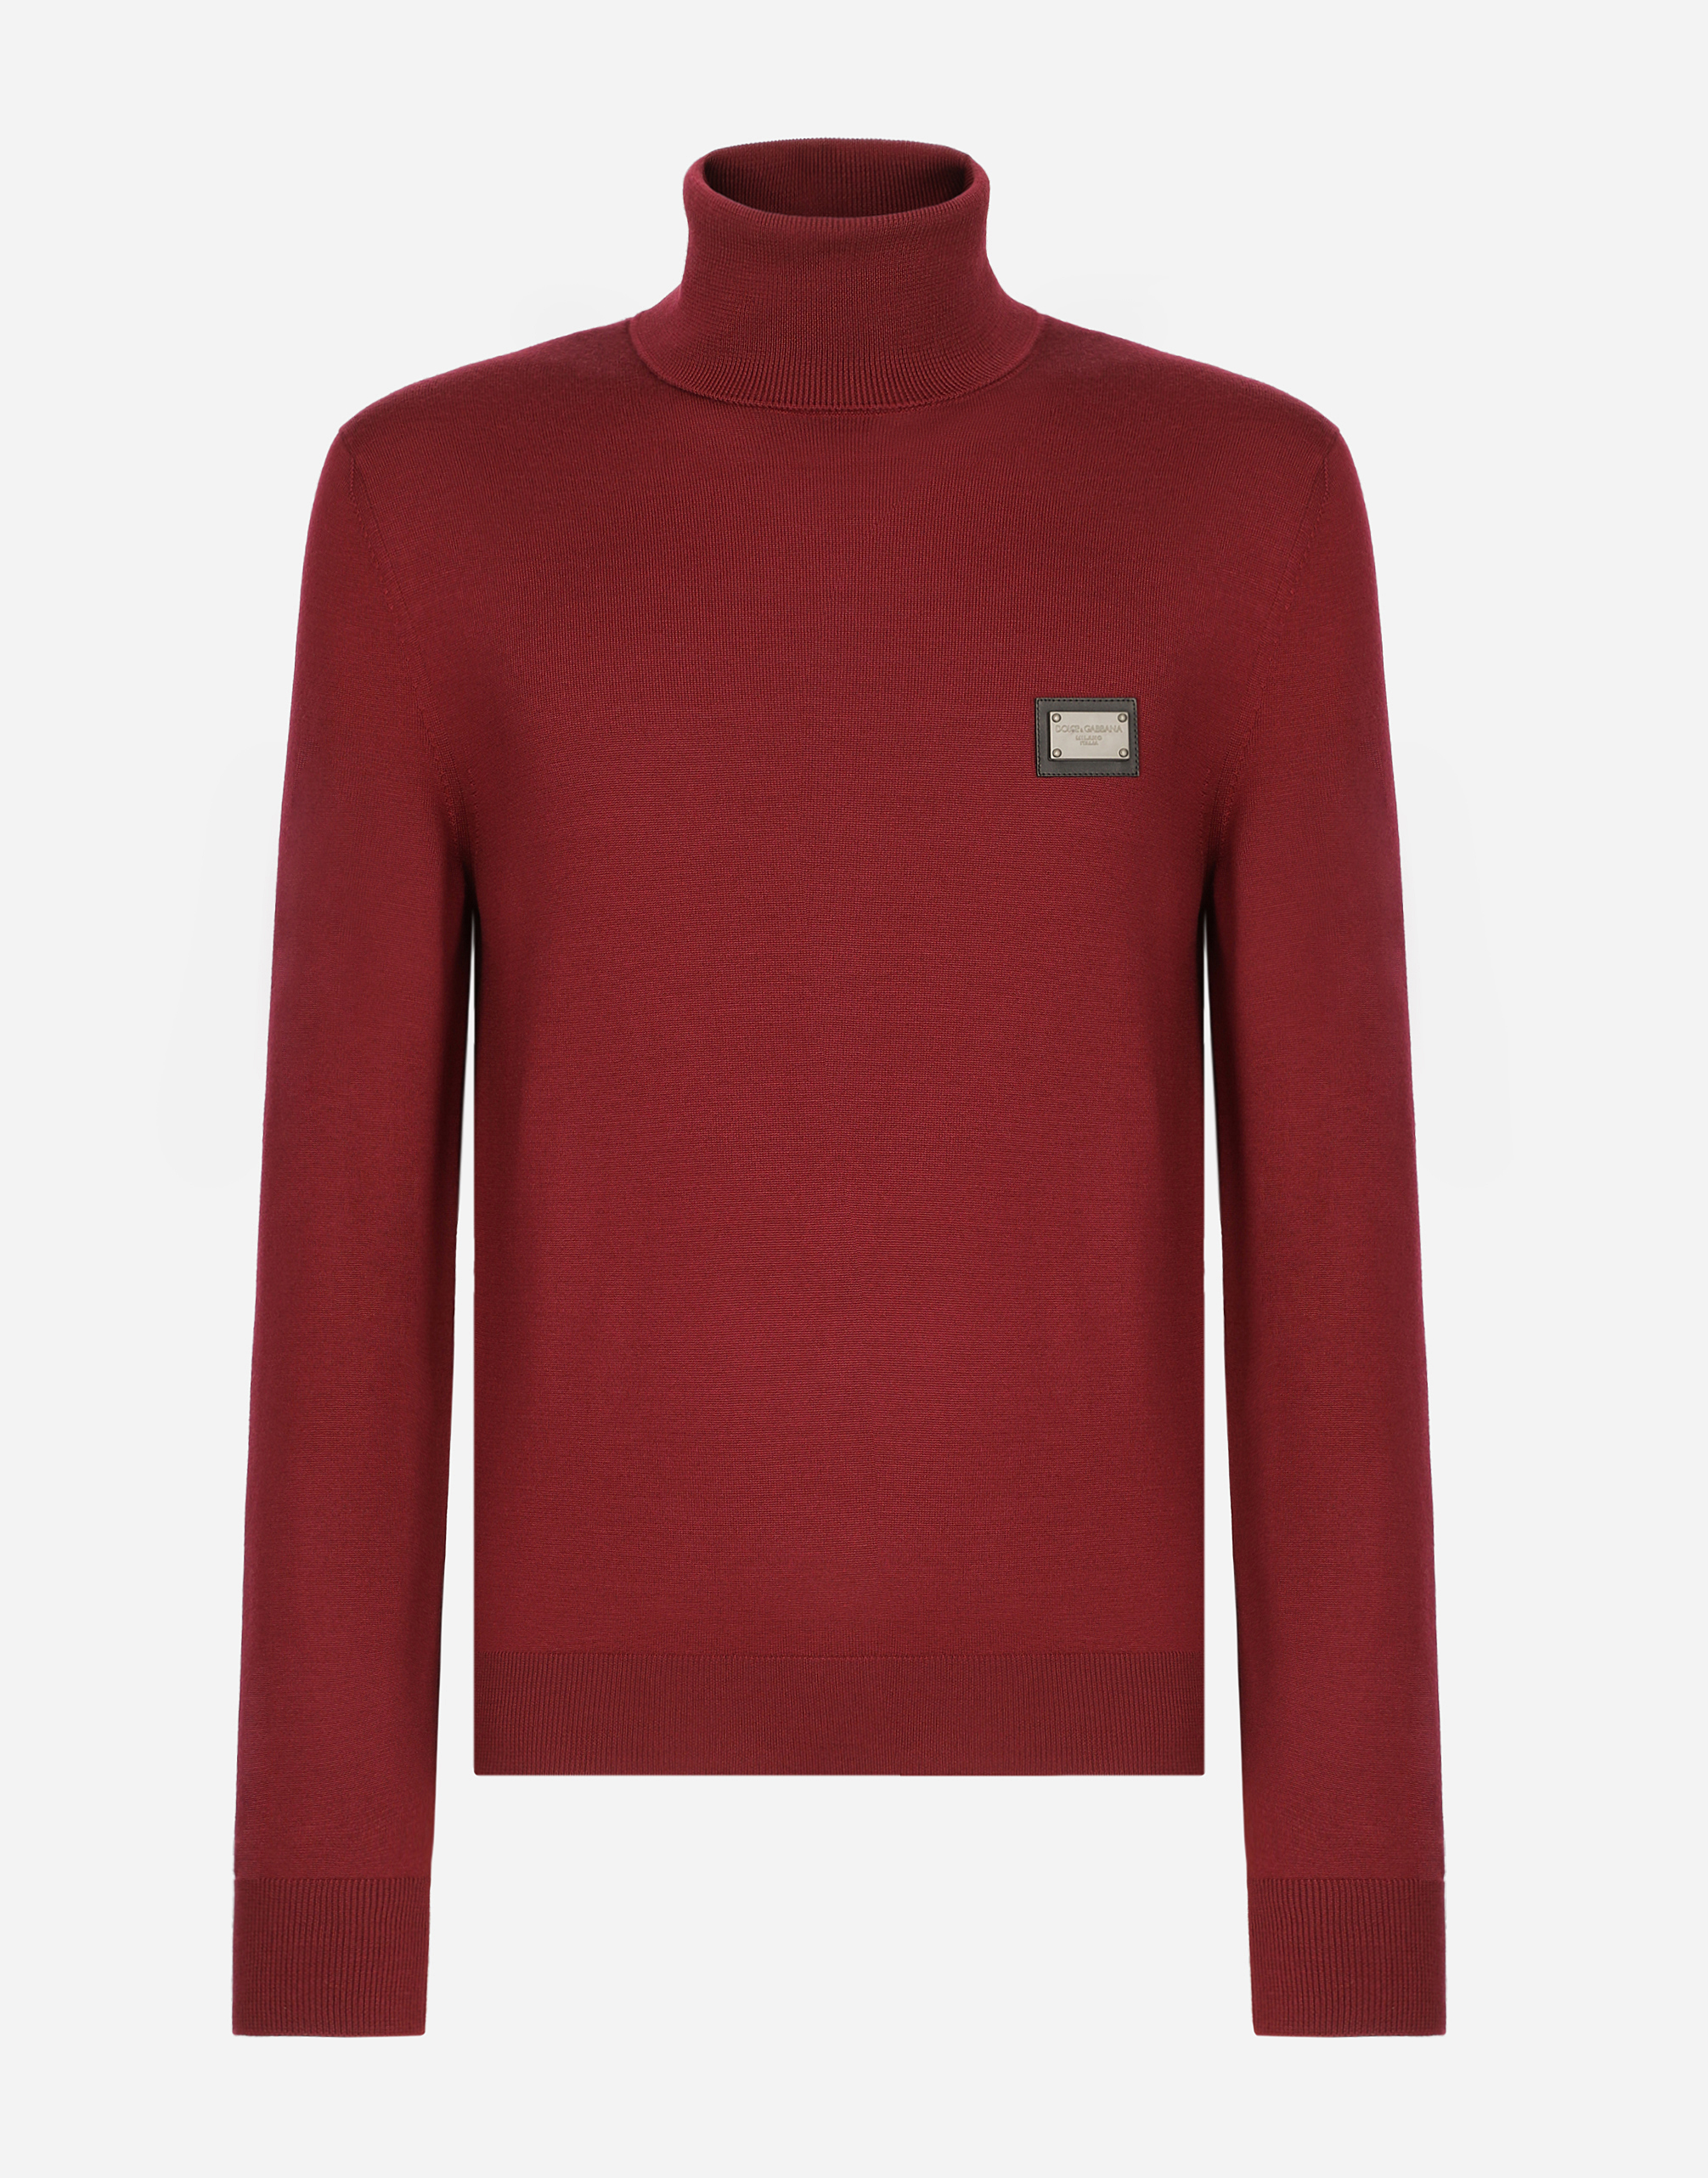 Wool turtle-neck sweater with branded tag in Bordeaux